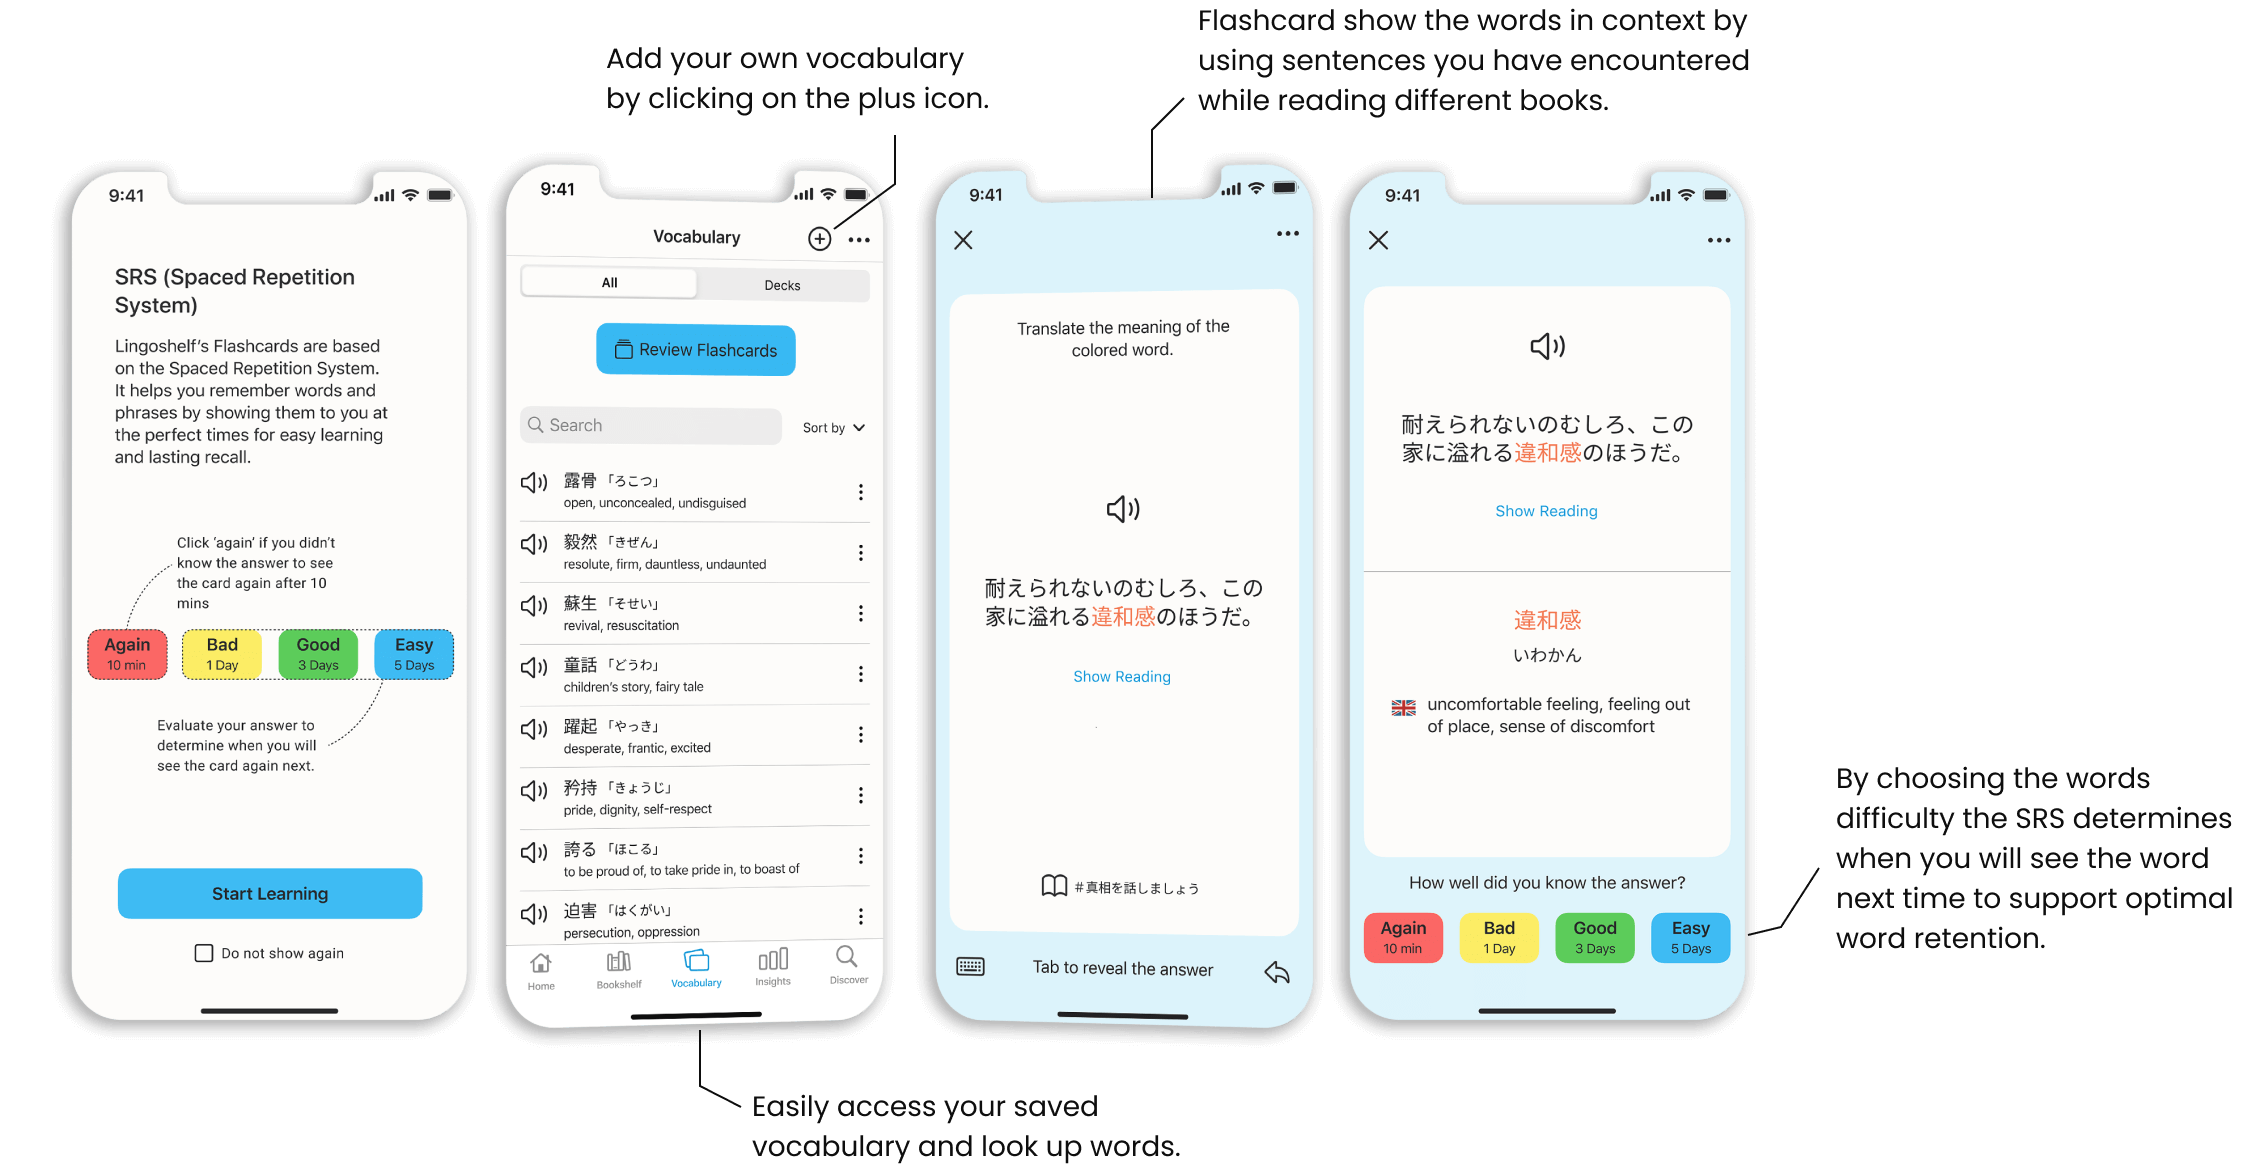 Screen Mockups of the final Flashcard Flow